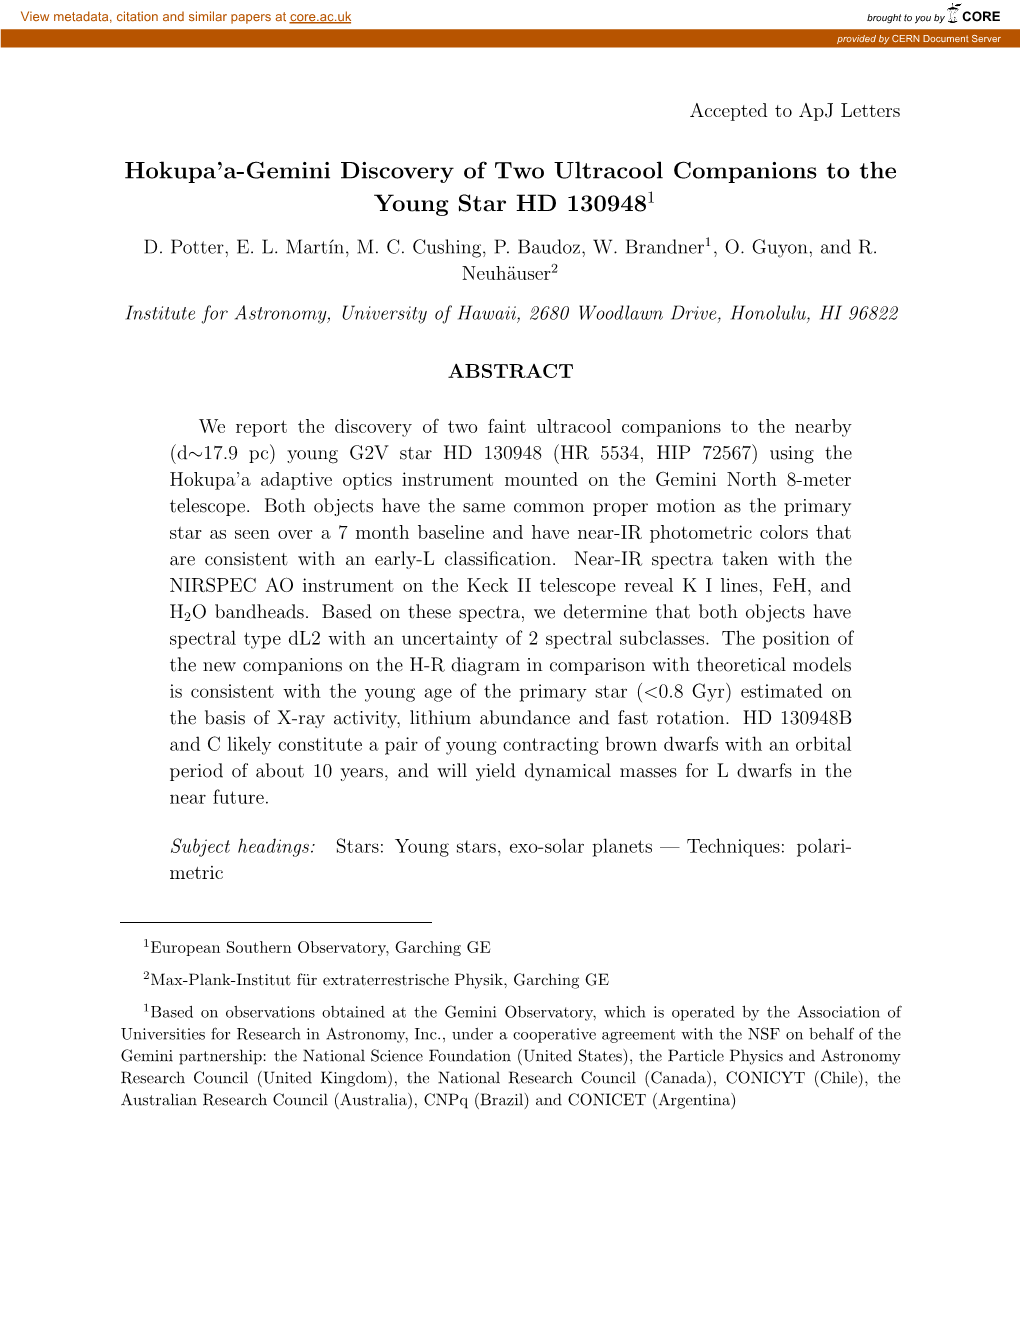 Hokupa'a-Gemini Discovery of Two Ultracool Companions to the Young Star HD 1309481